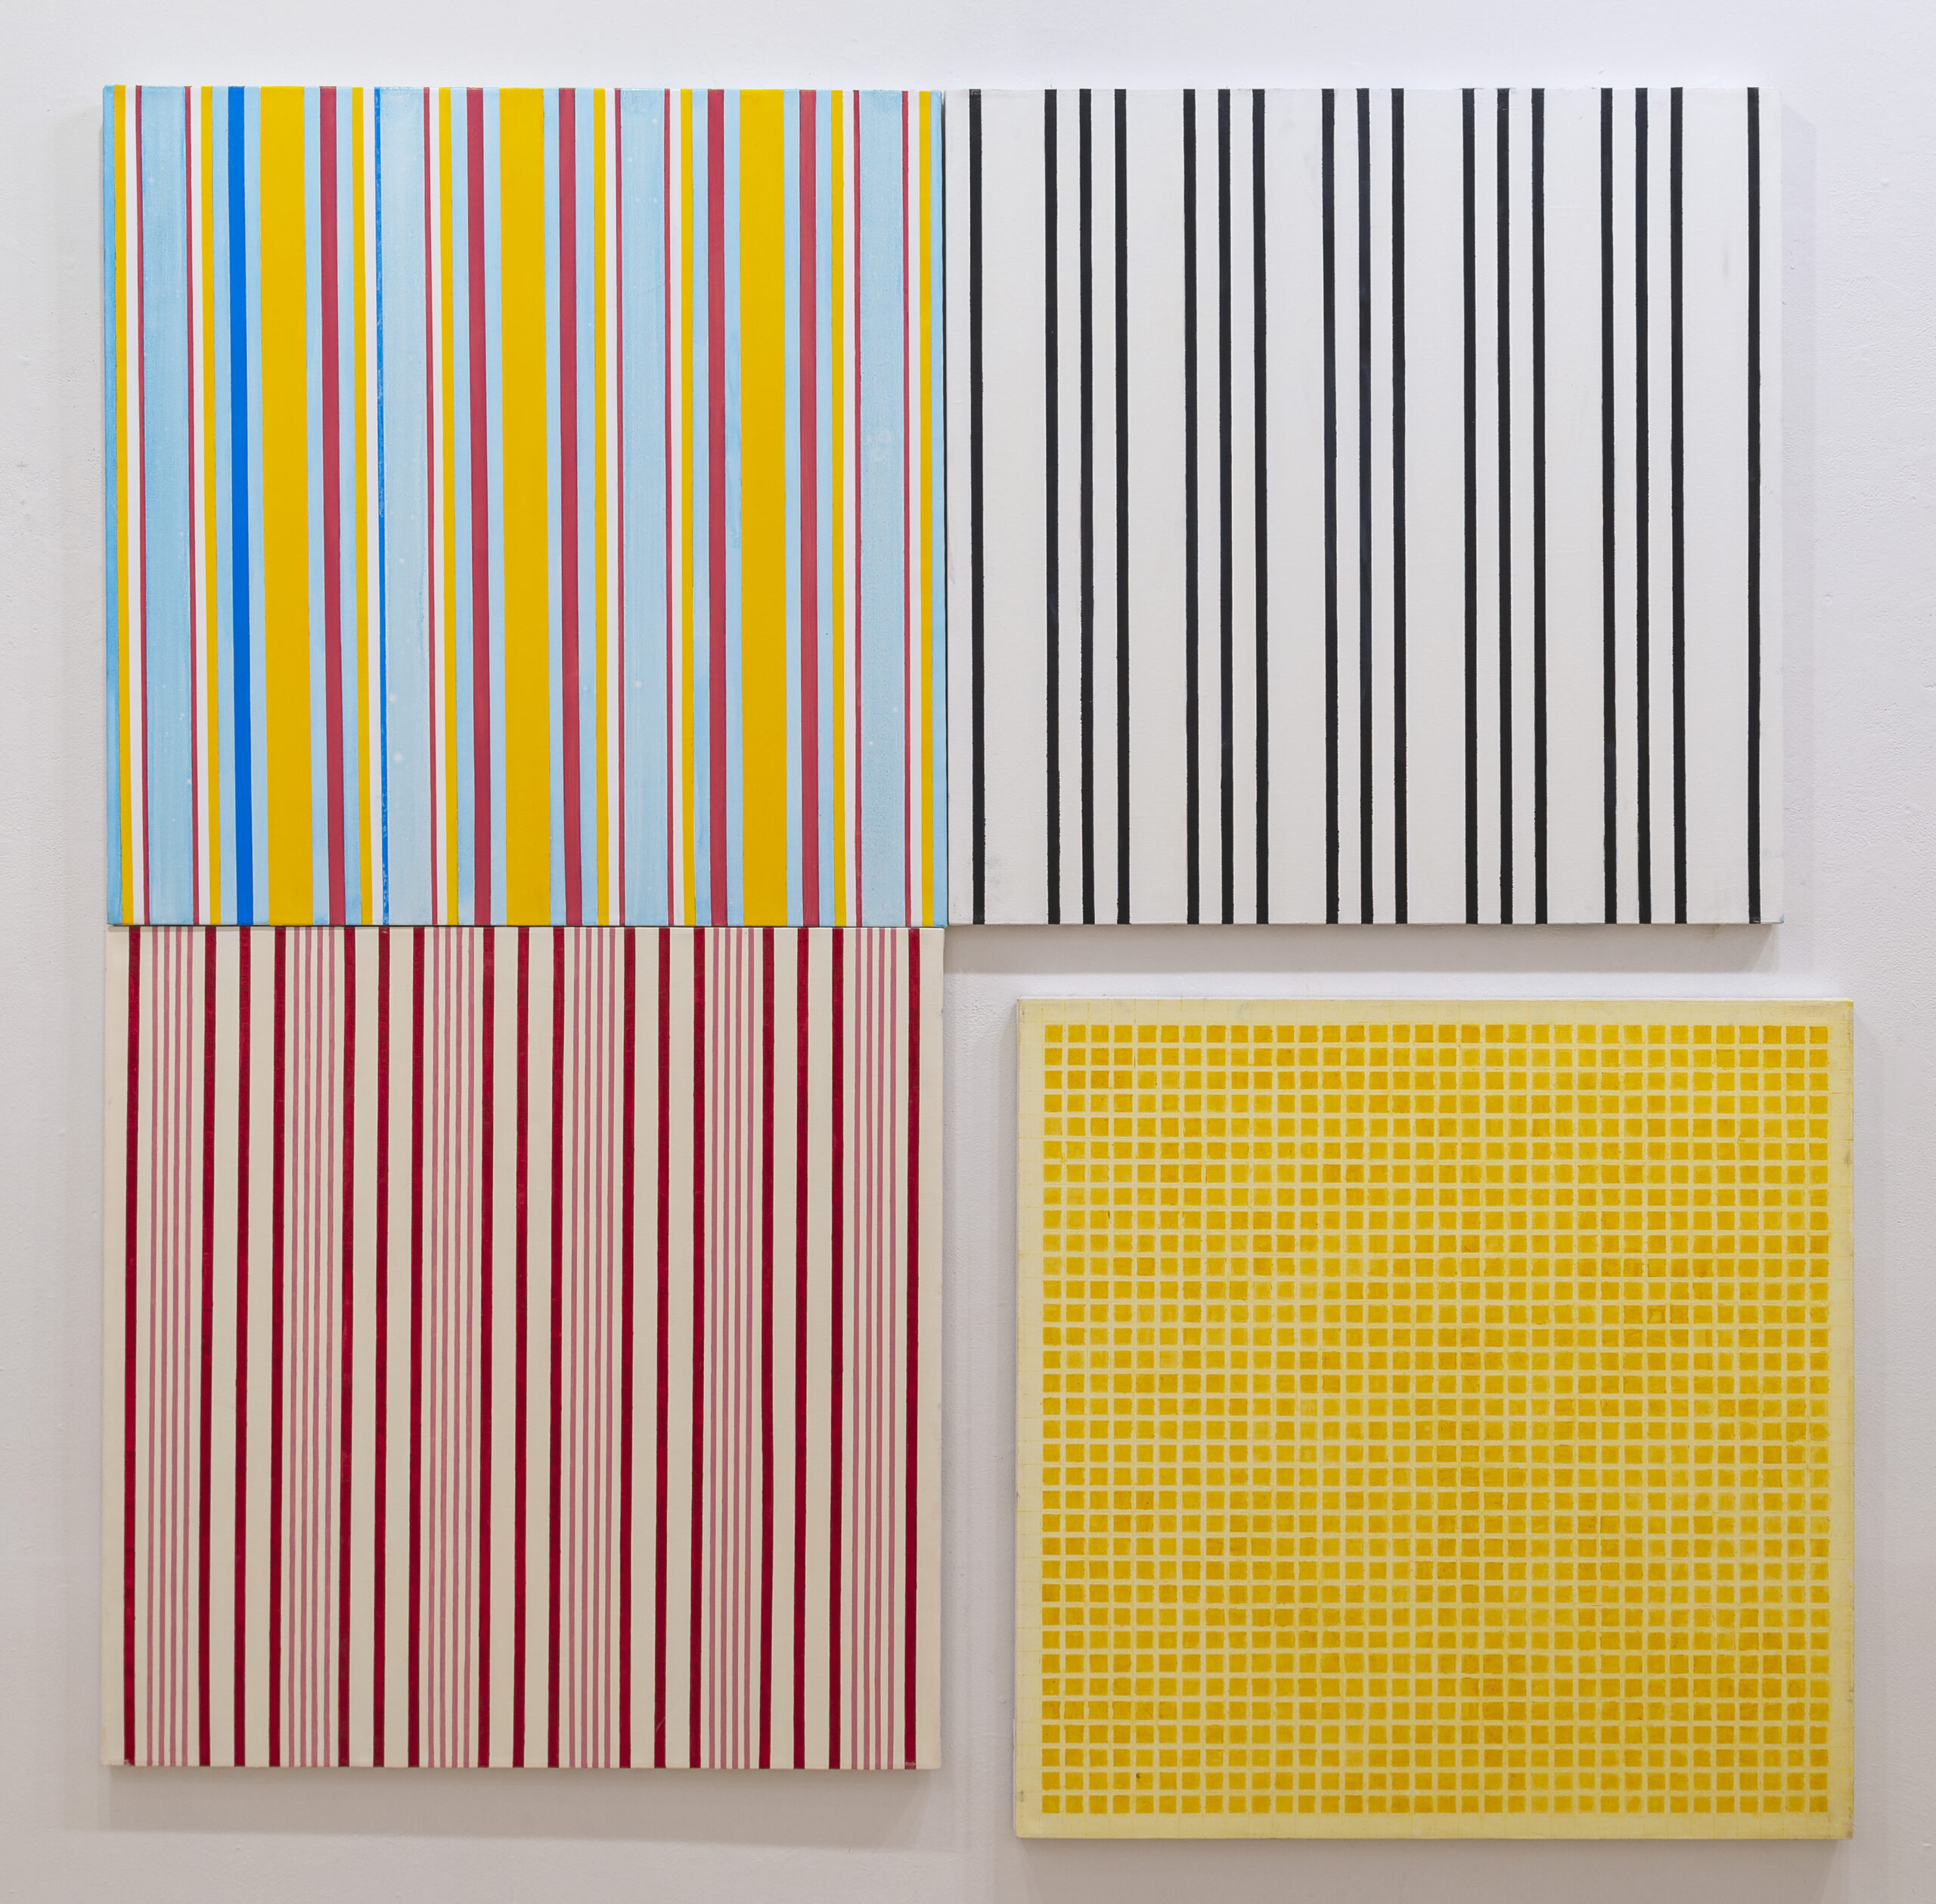 four paintings consisting of lines, on four small canvases